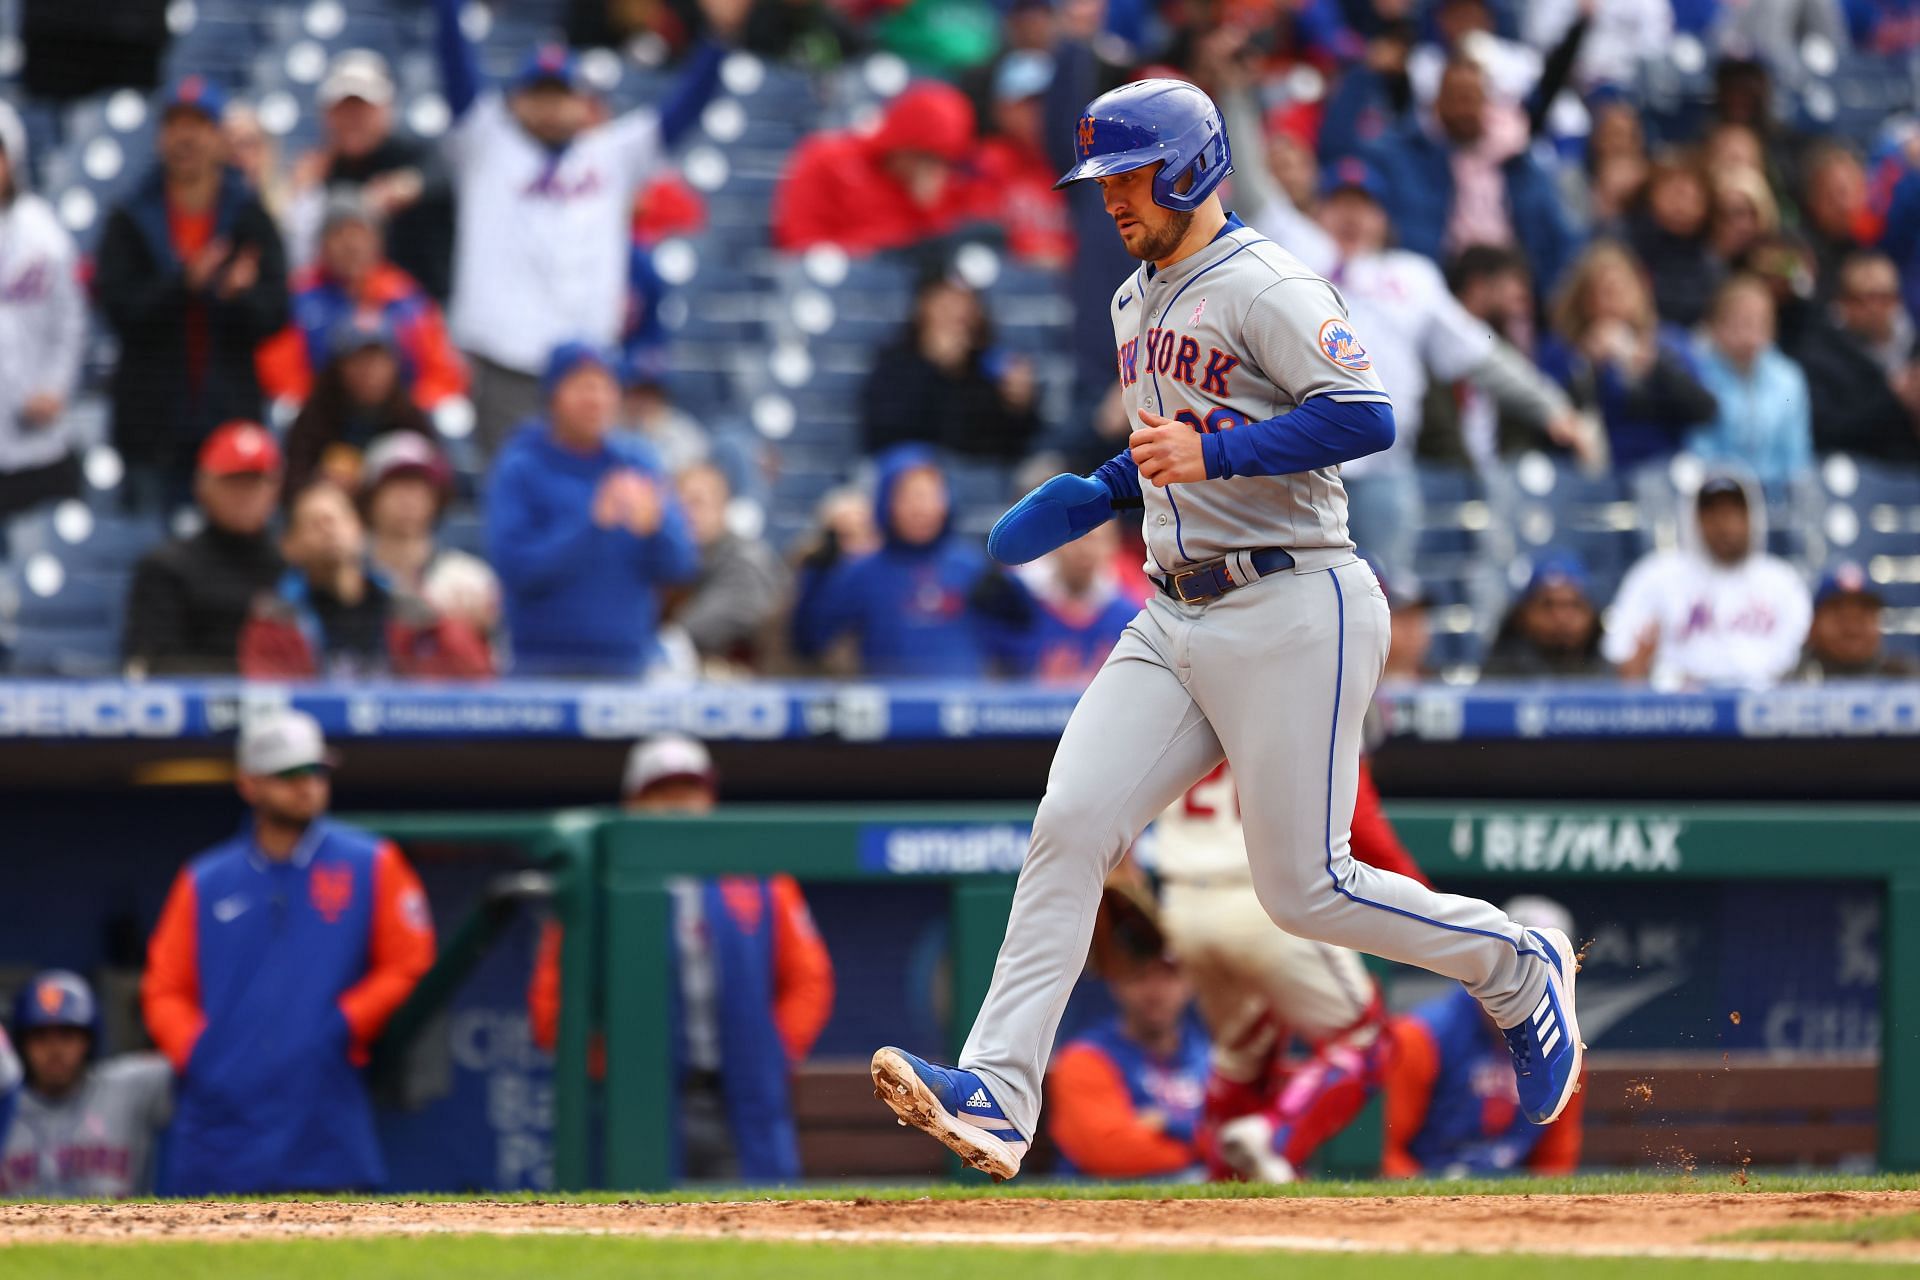 Watch New York Mets third baseman ends tie to win the game against Los